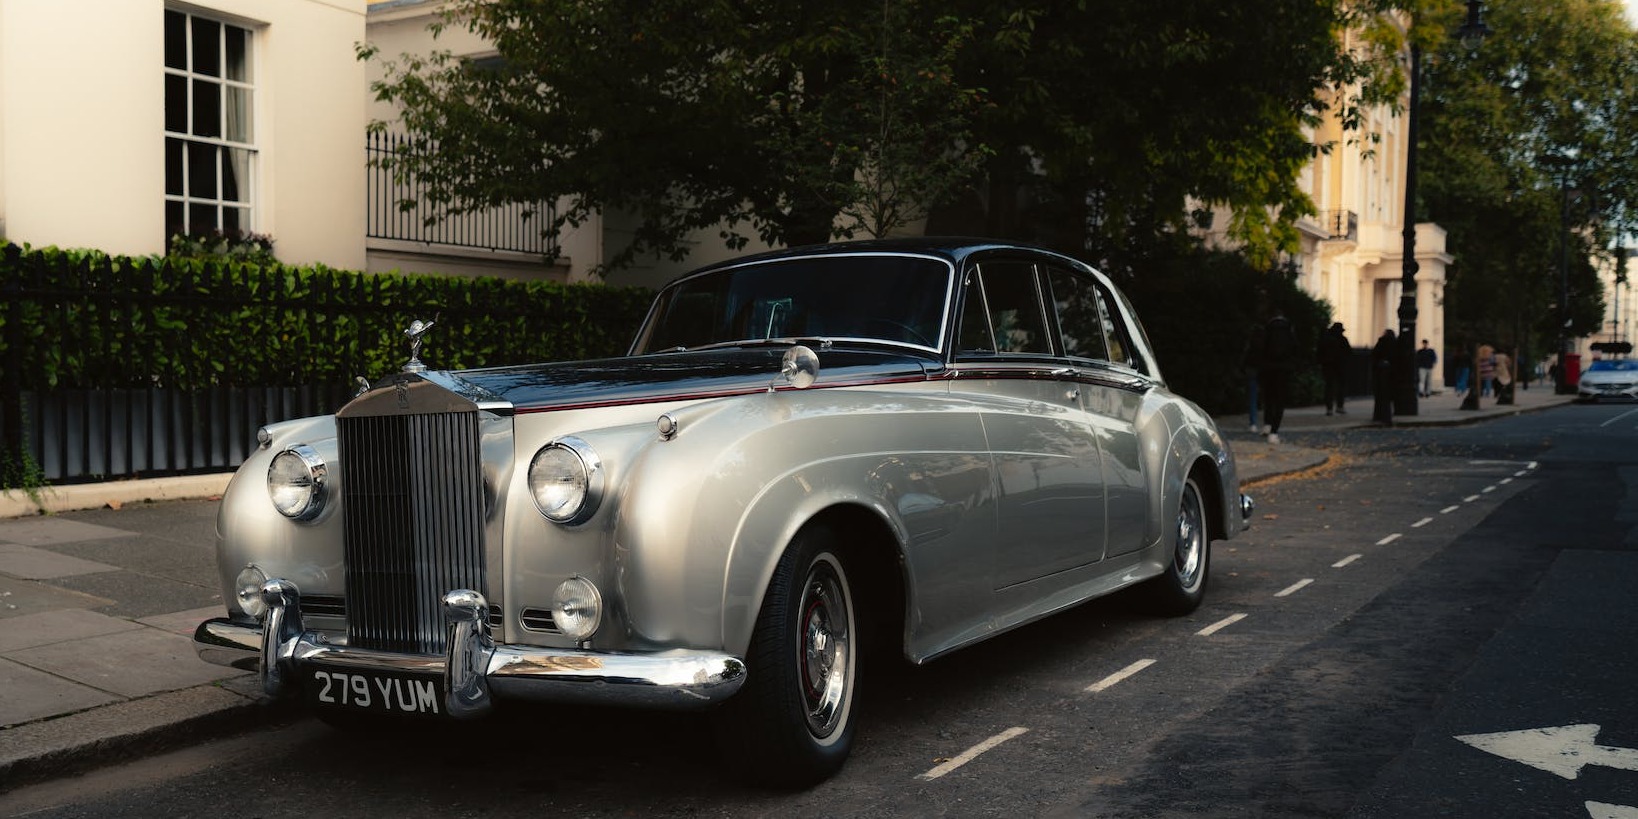 Making Your Wedding Day Special with Classic Car Hire in Bath